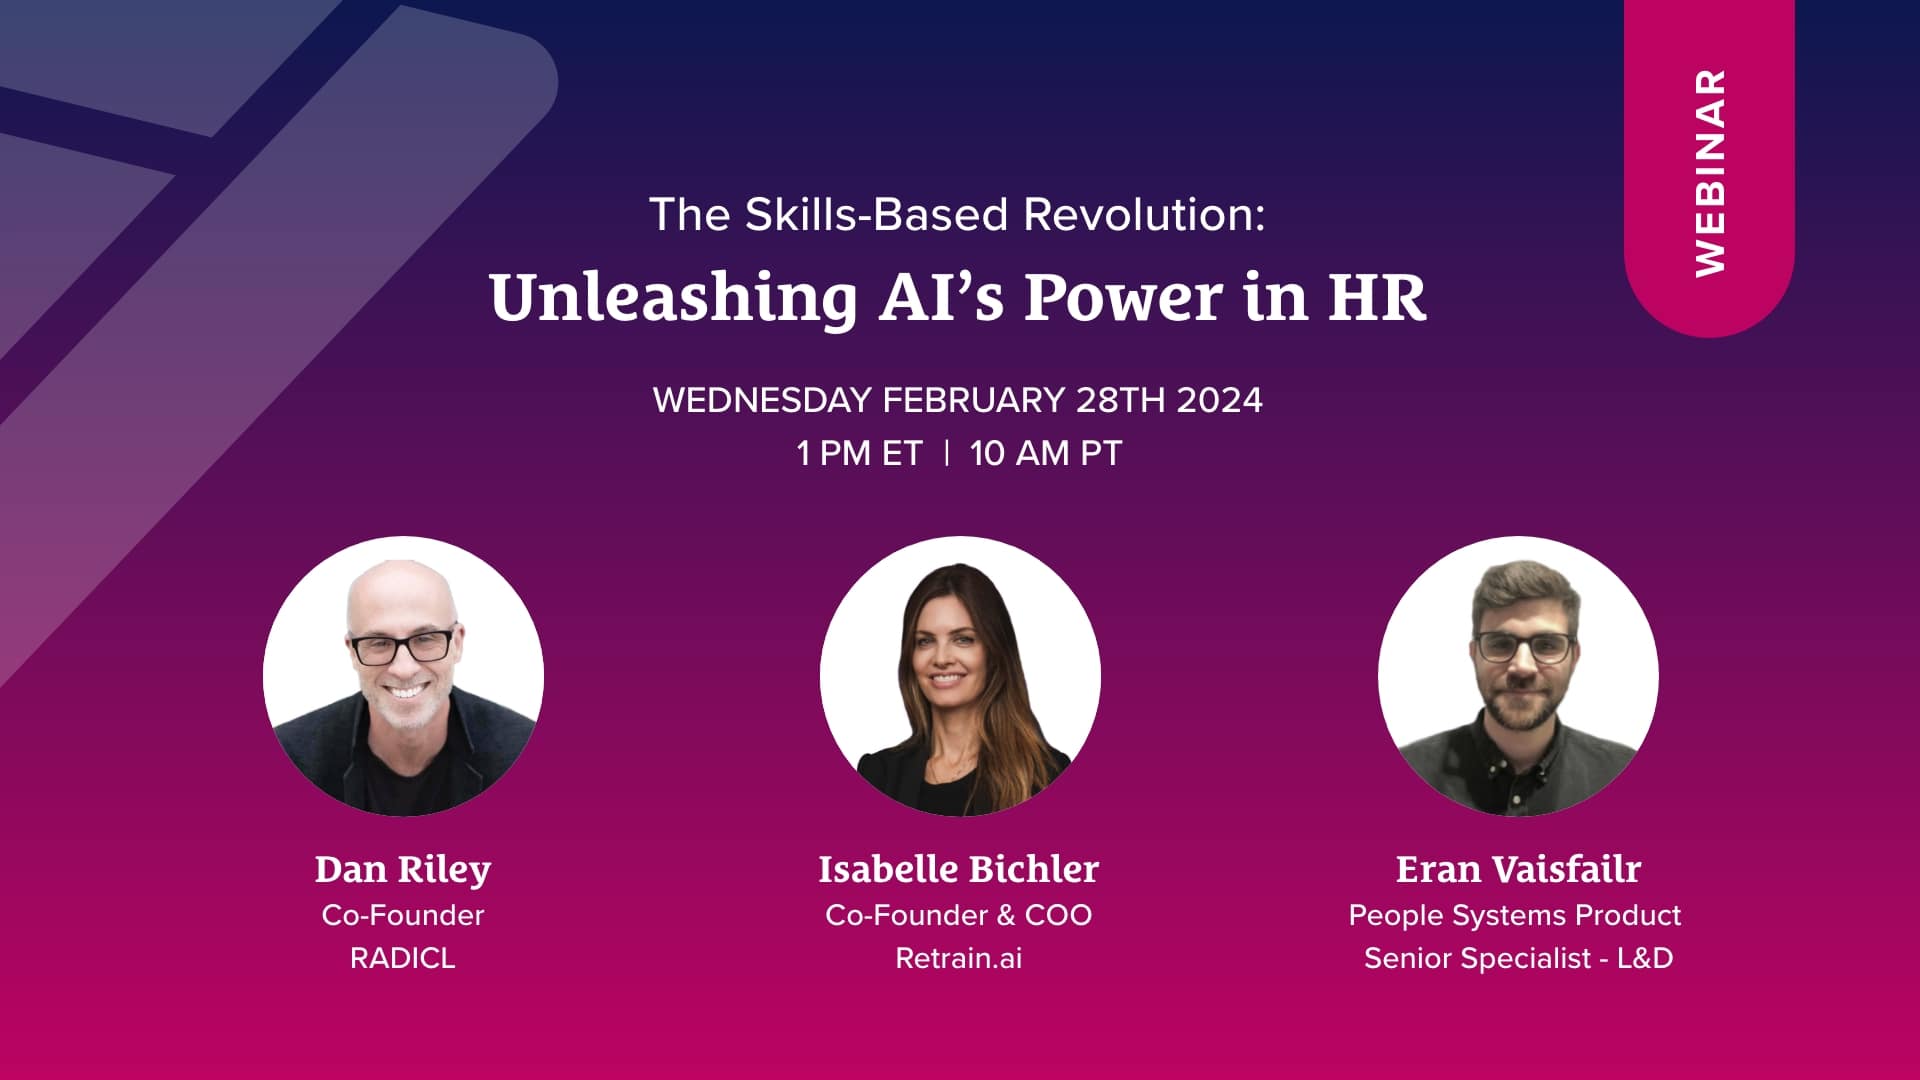 Join retrain.ai, RADICL, and Booking.com for a webinar on unleashing AI's power in HR.